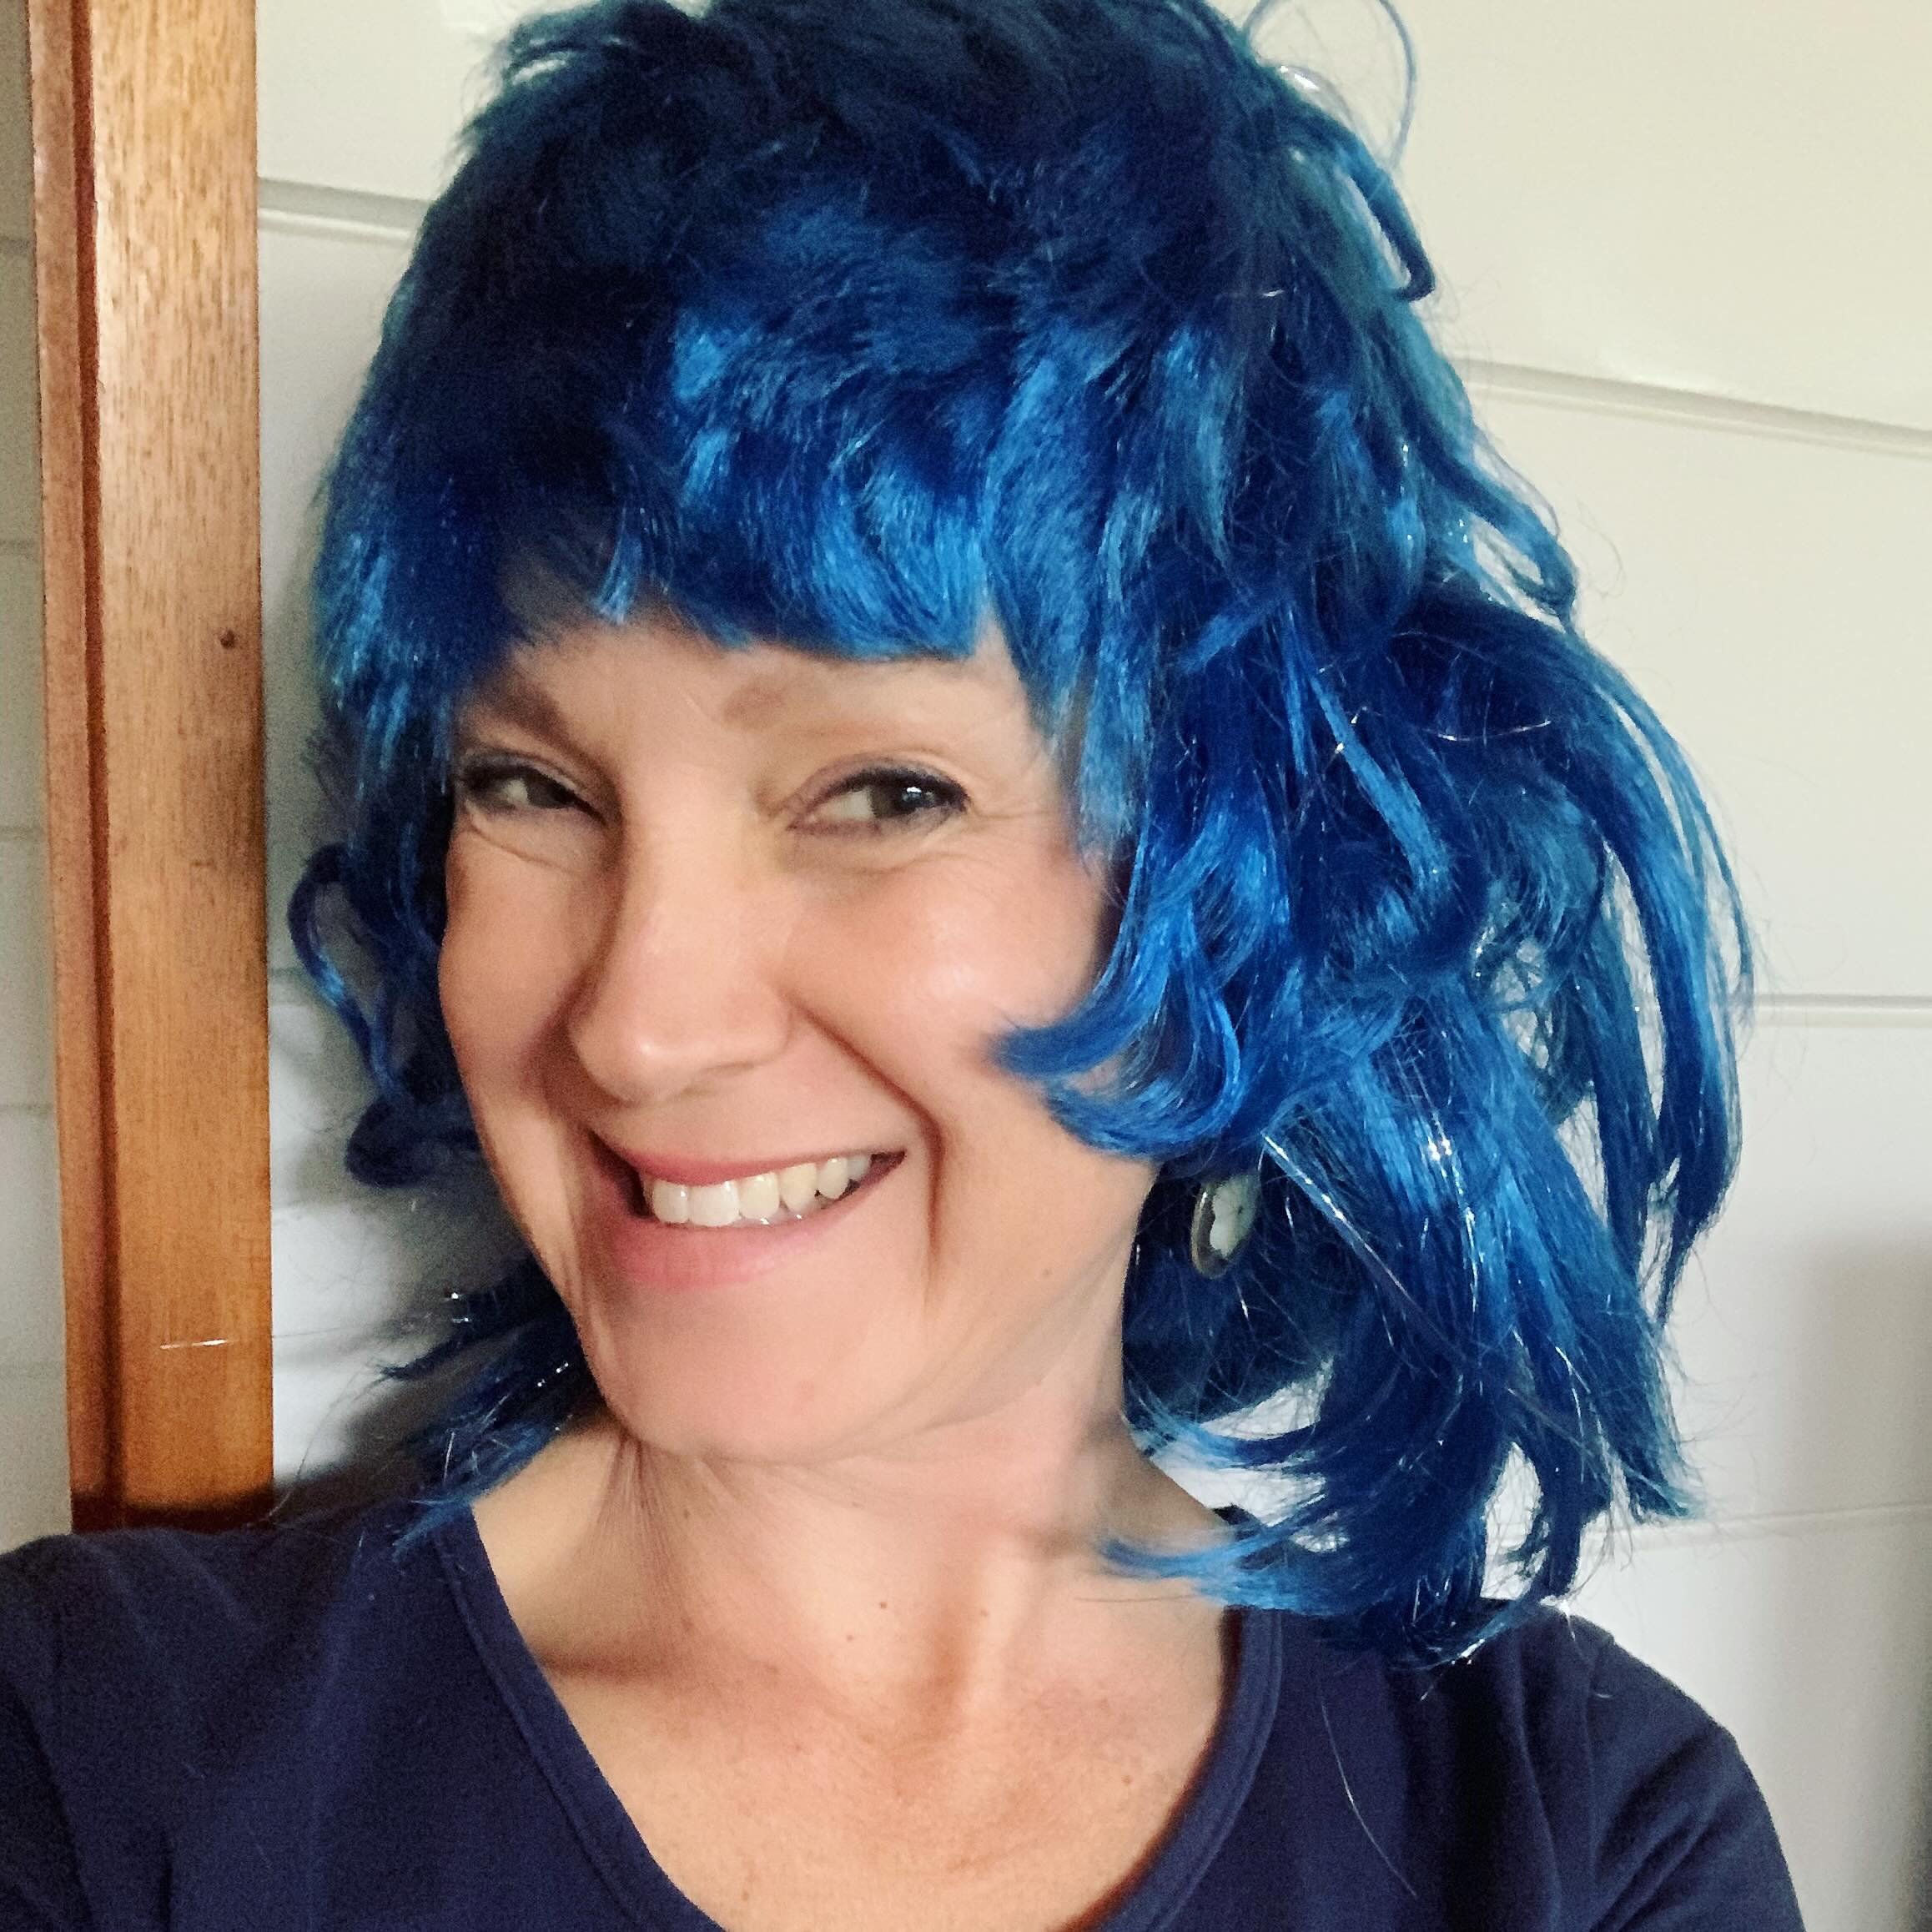 💙Blue hair is new for me. What do you think? 🤔 

Dressing up has been a bit of a theme in my life. As a child and teen, I loved dressing up. My twenty-first birthday party was fancy dress too!  During university, I worked part-time at a costume sho